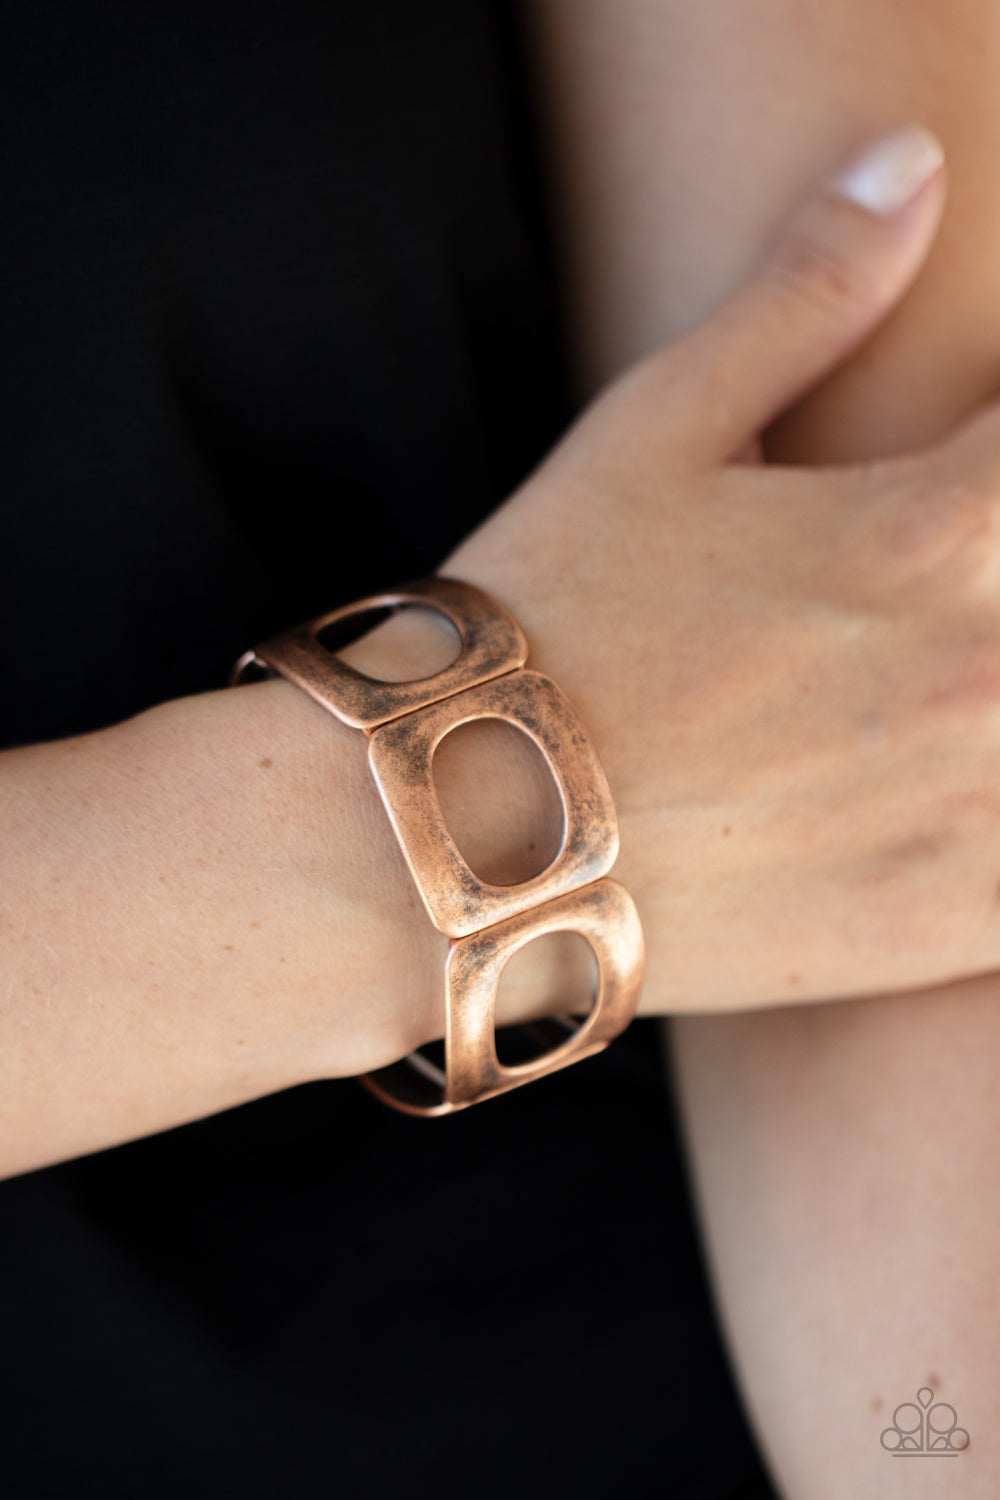 In OVAL Your Head - Copper Bracelet - Princess Glam Shop